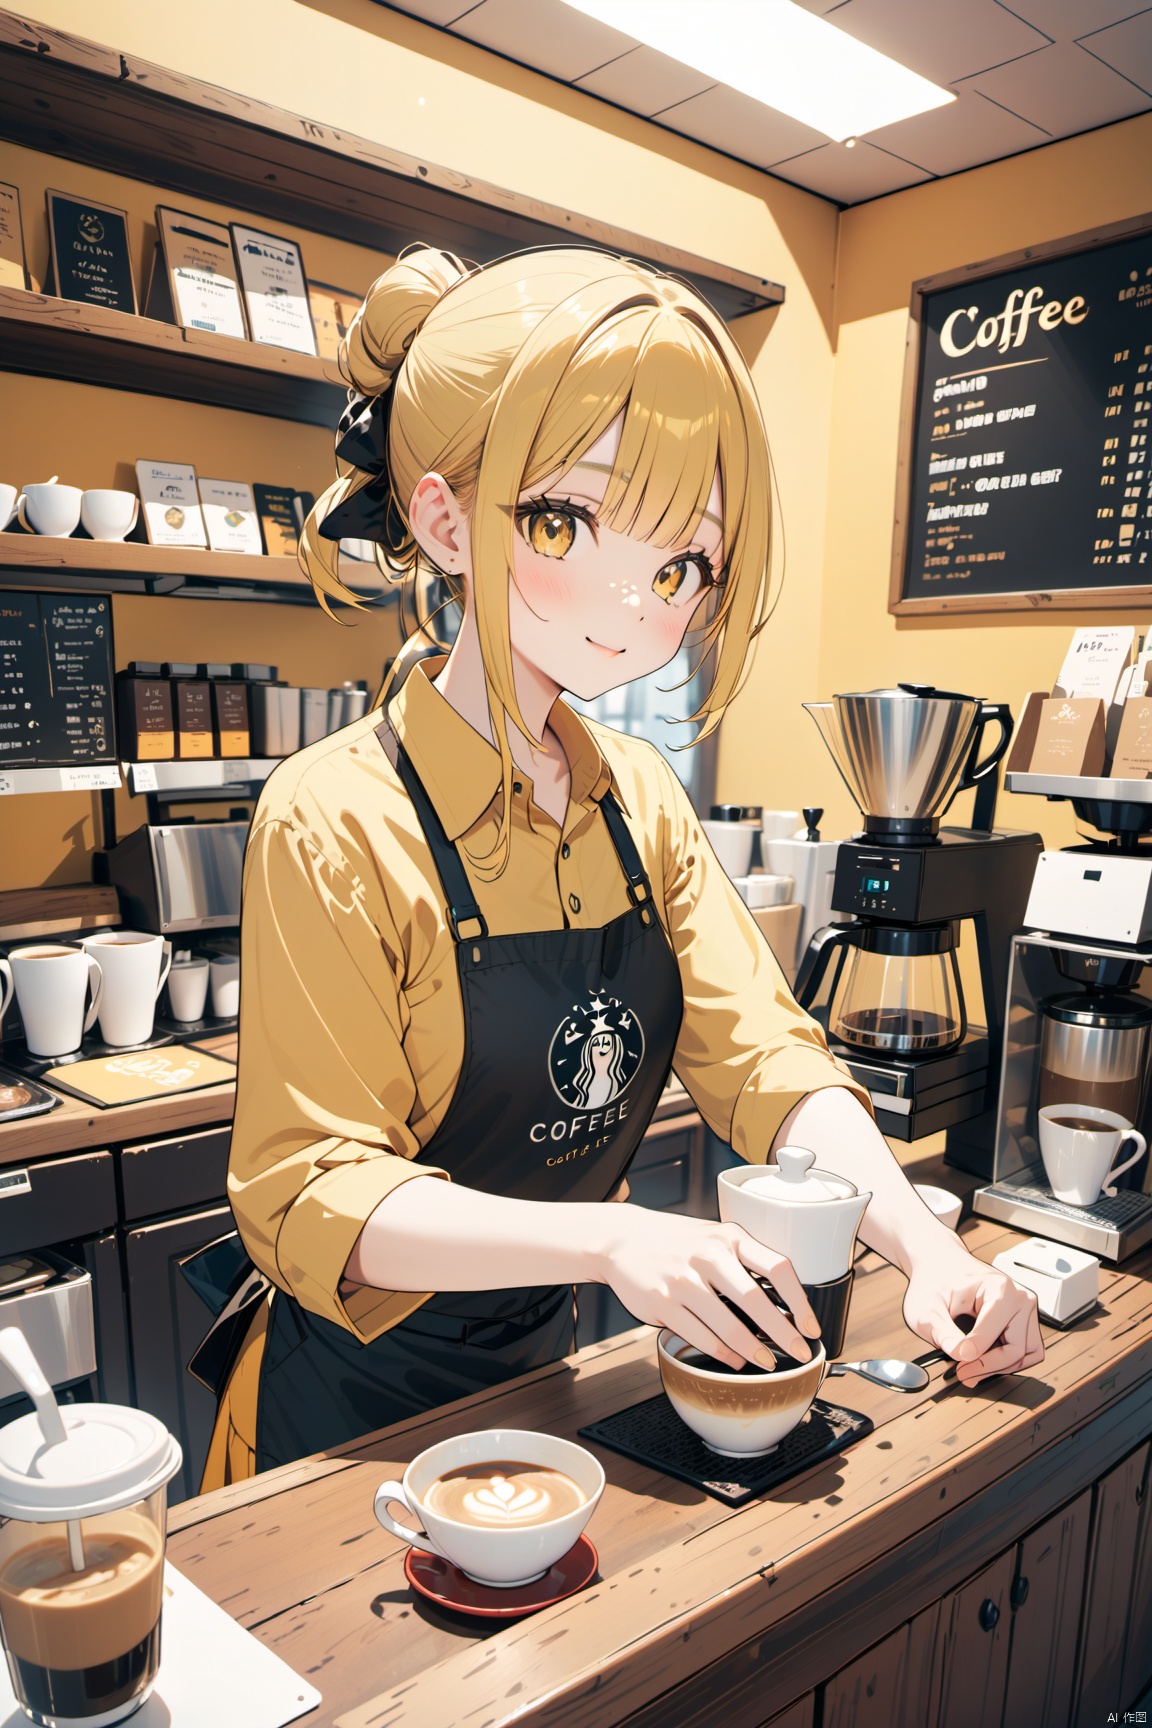  A clerk with yellow shirt in a coffee shop is making coffee